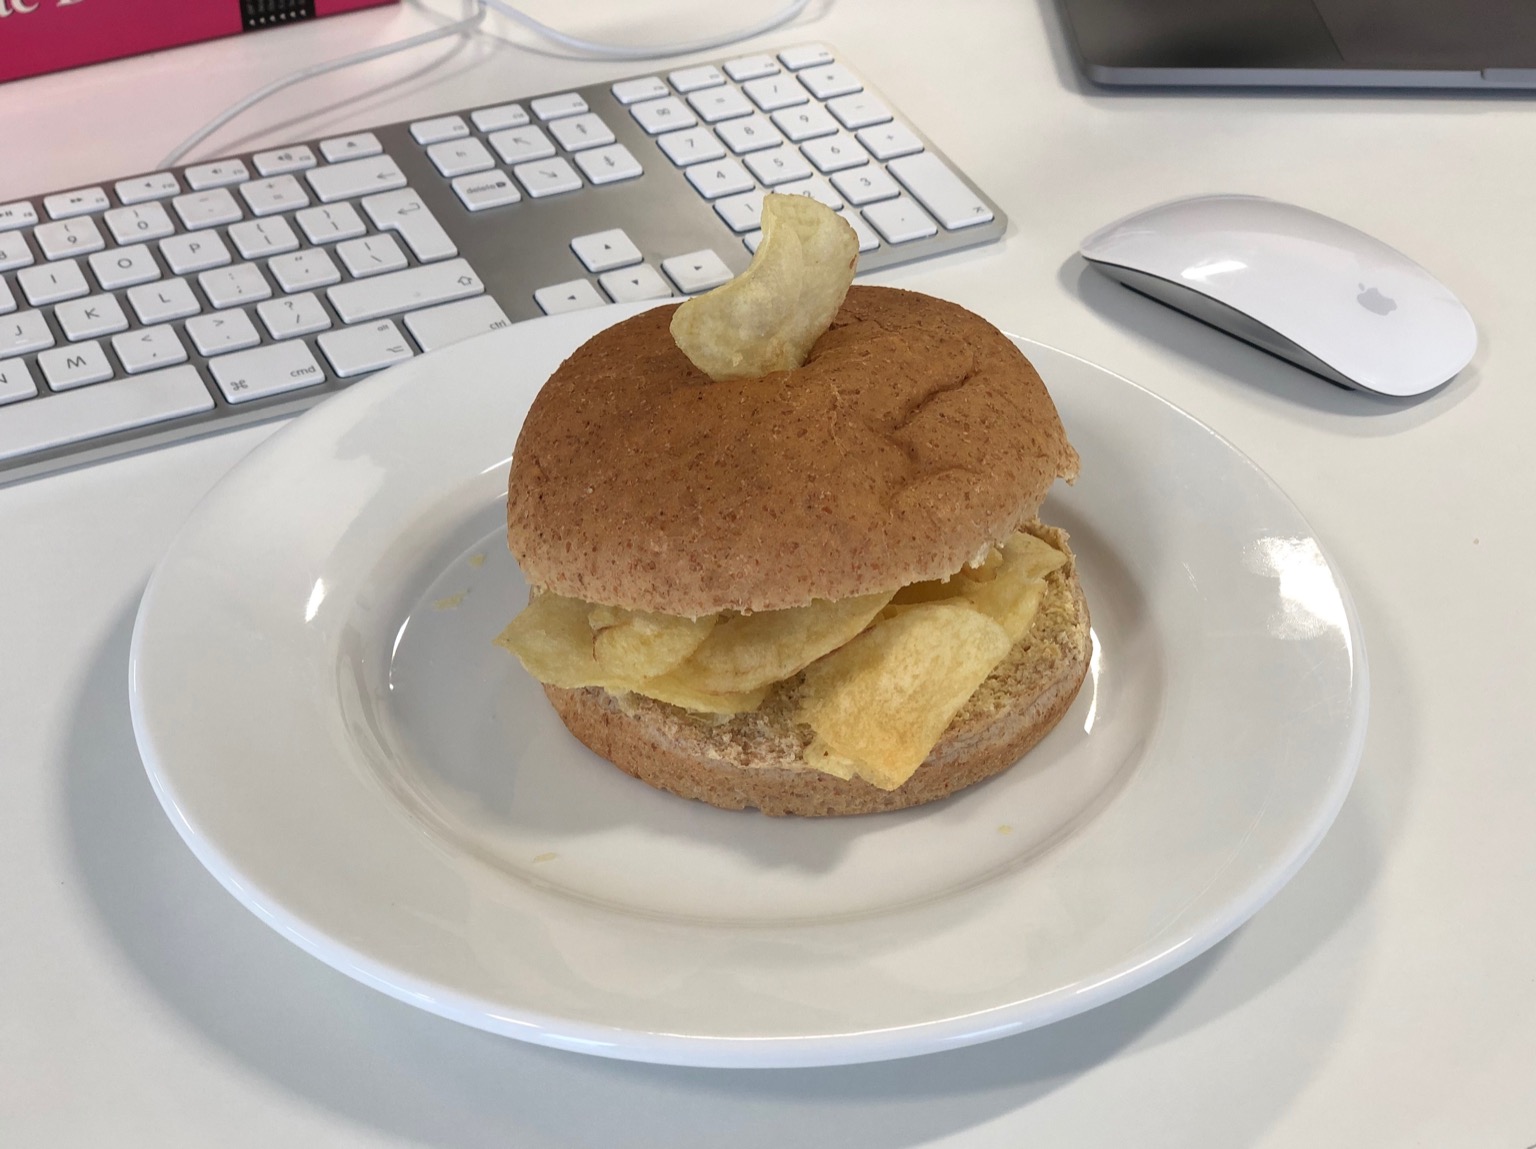 Potato crisps in and on a brown roll